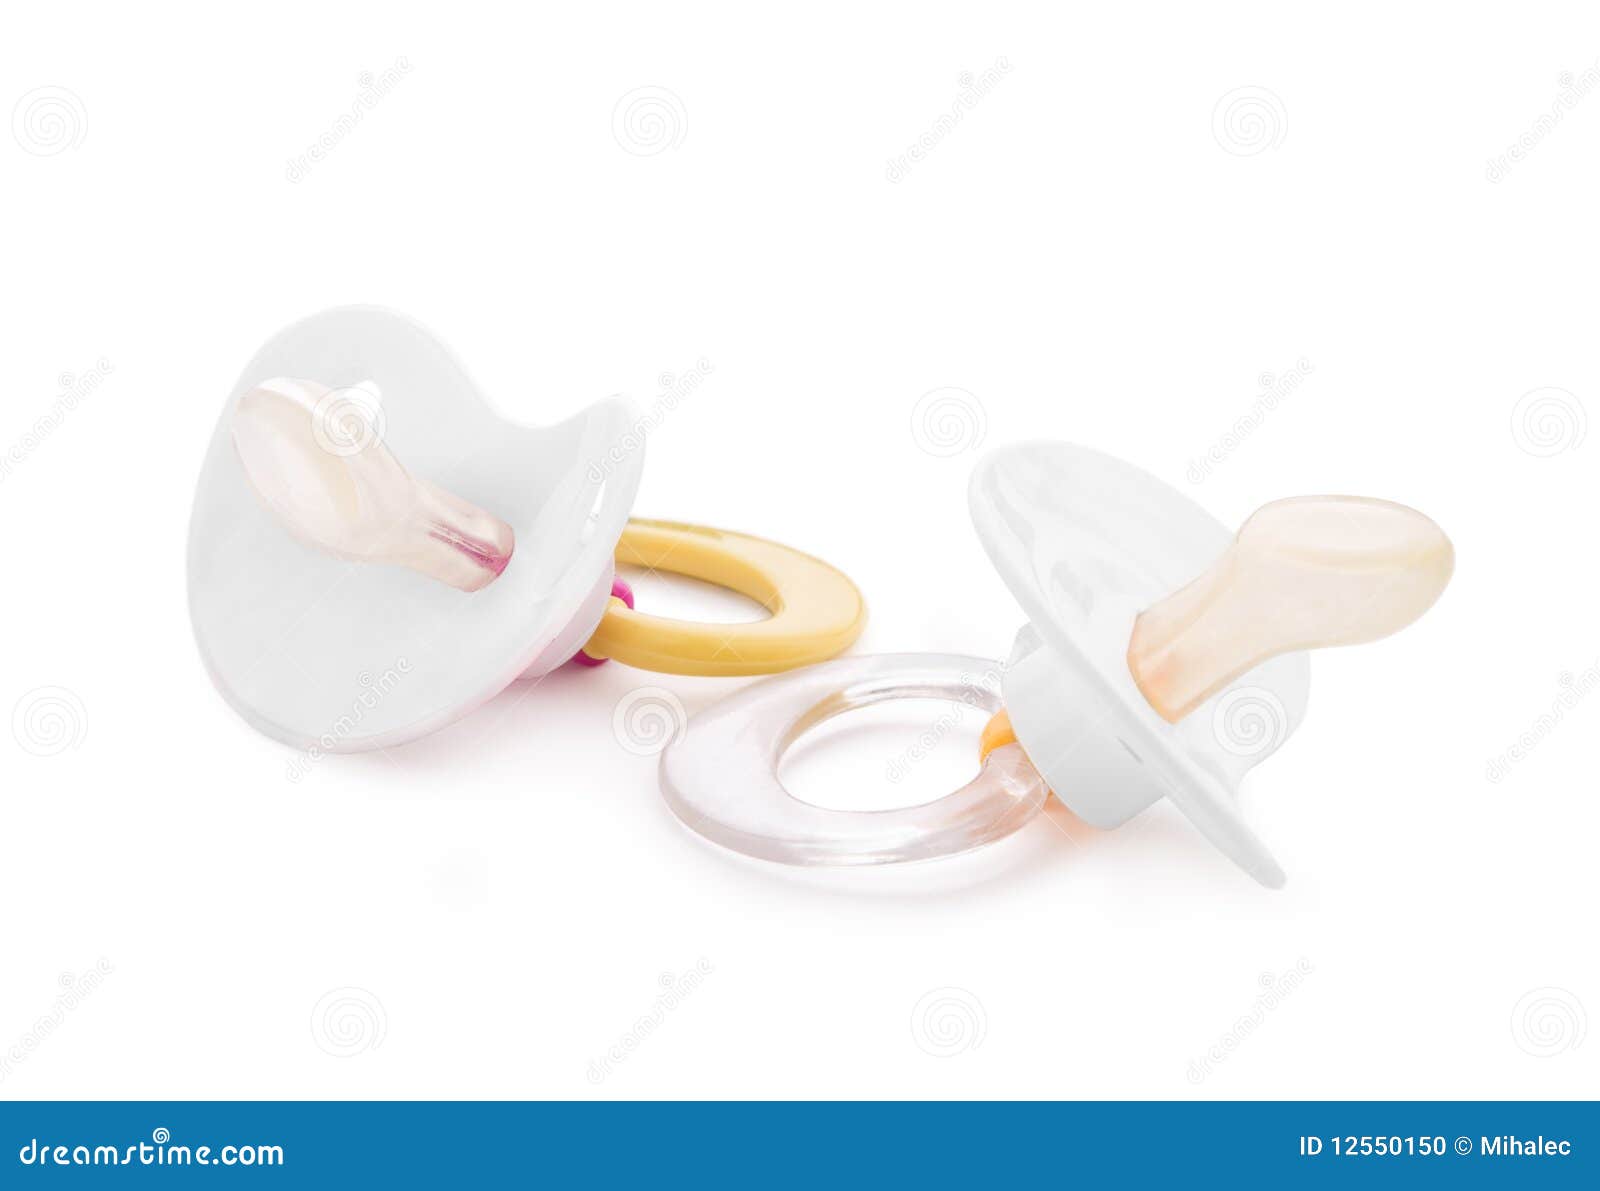 Two Childrens Dummies it is Isolated Stock Photo - Image of object ...